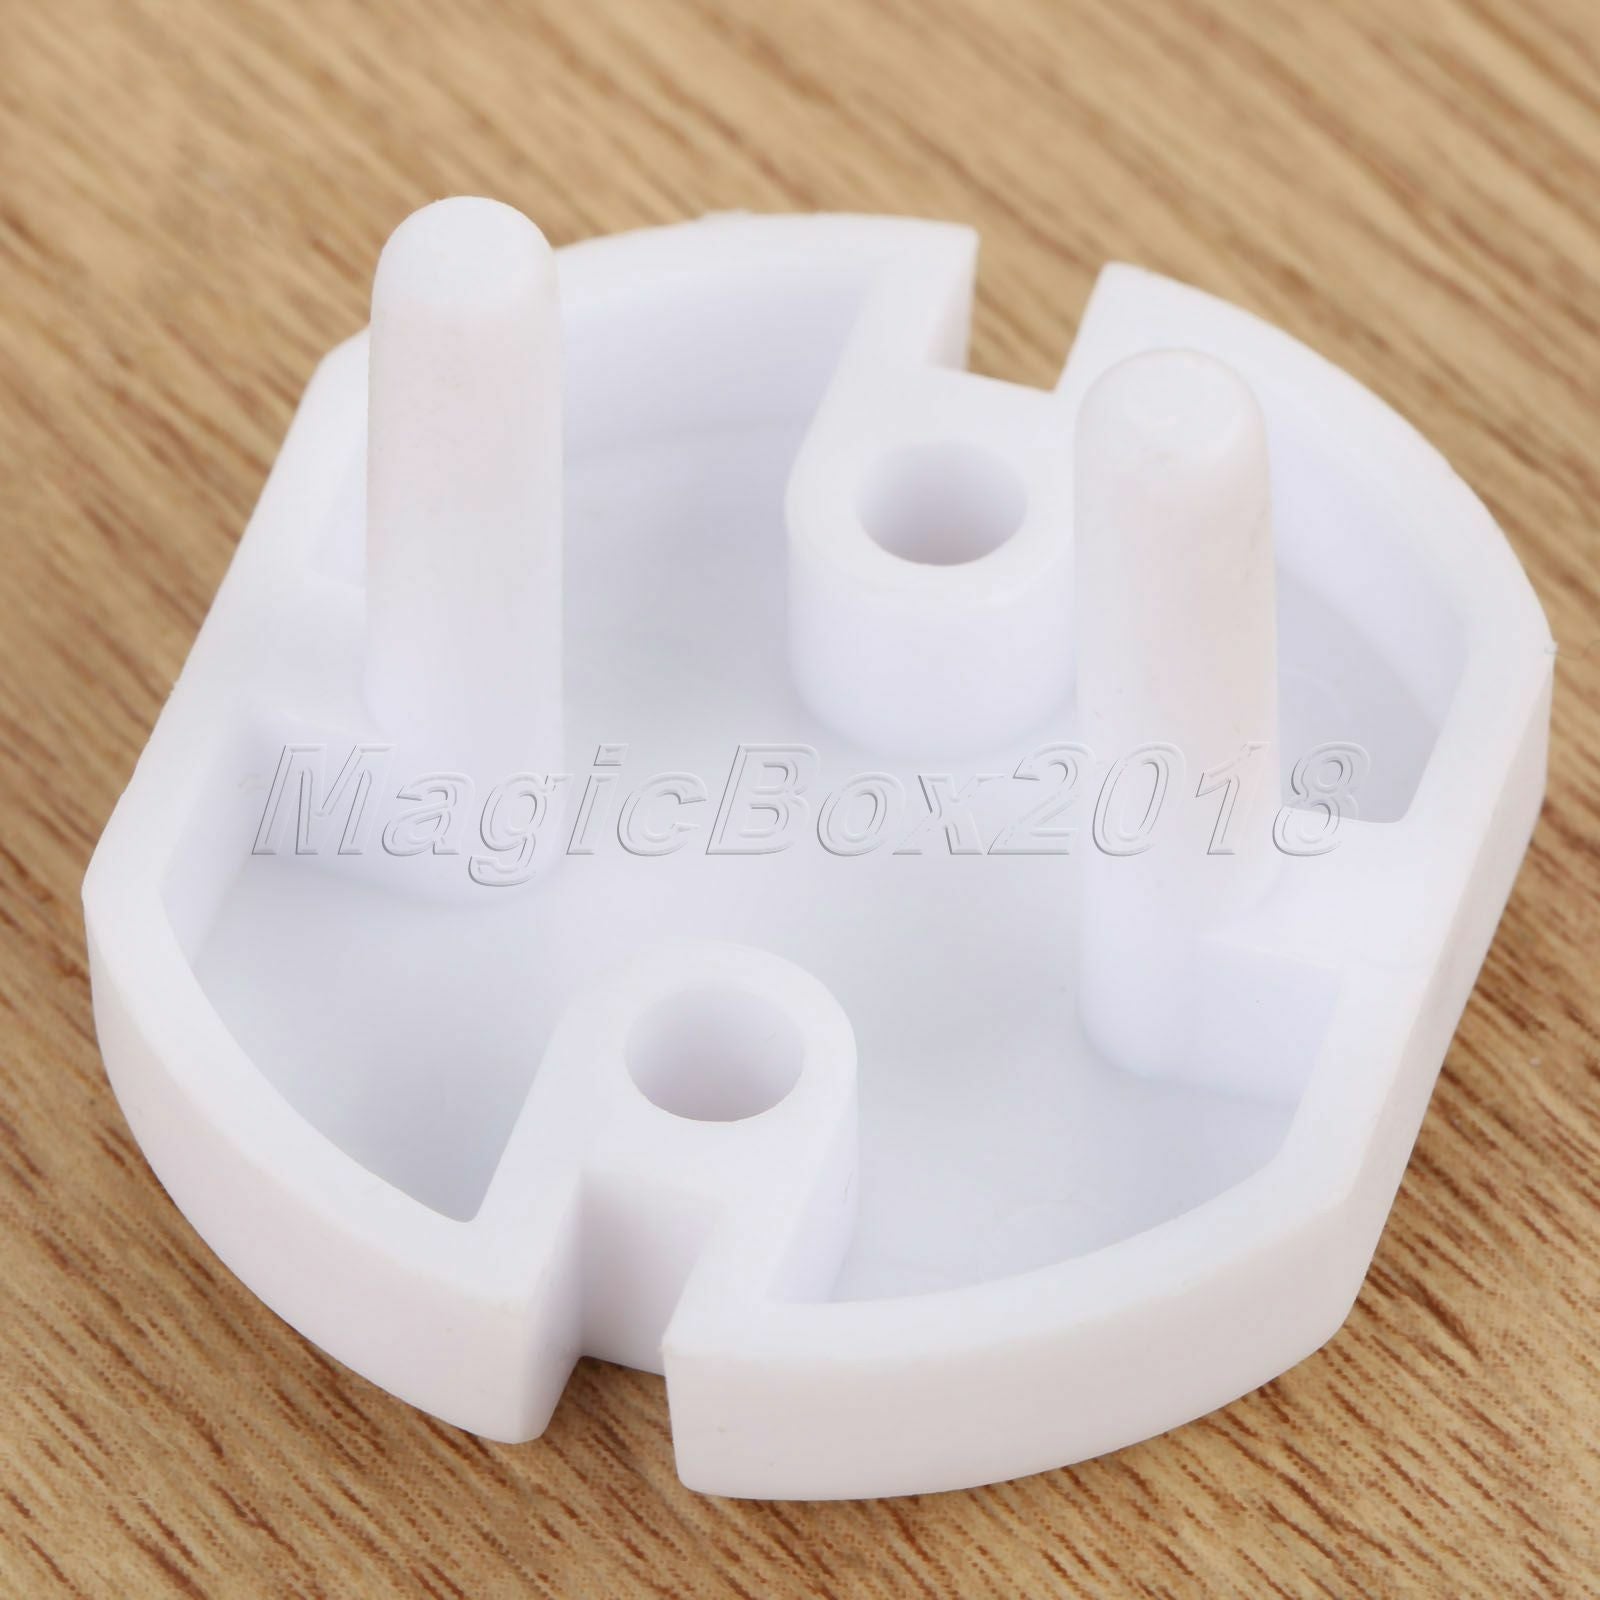 10pcs EU Plug Socket Cover Baby Proof Child Safety Protector Guard Electrical